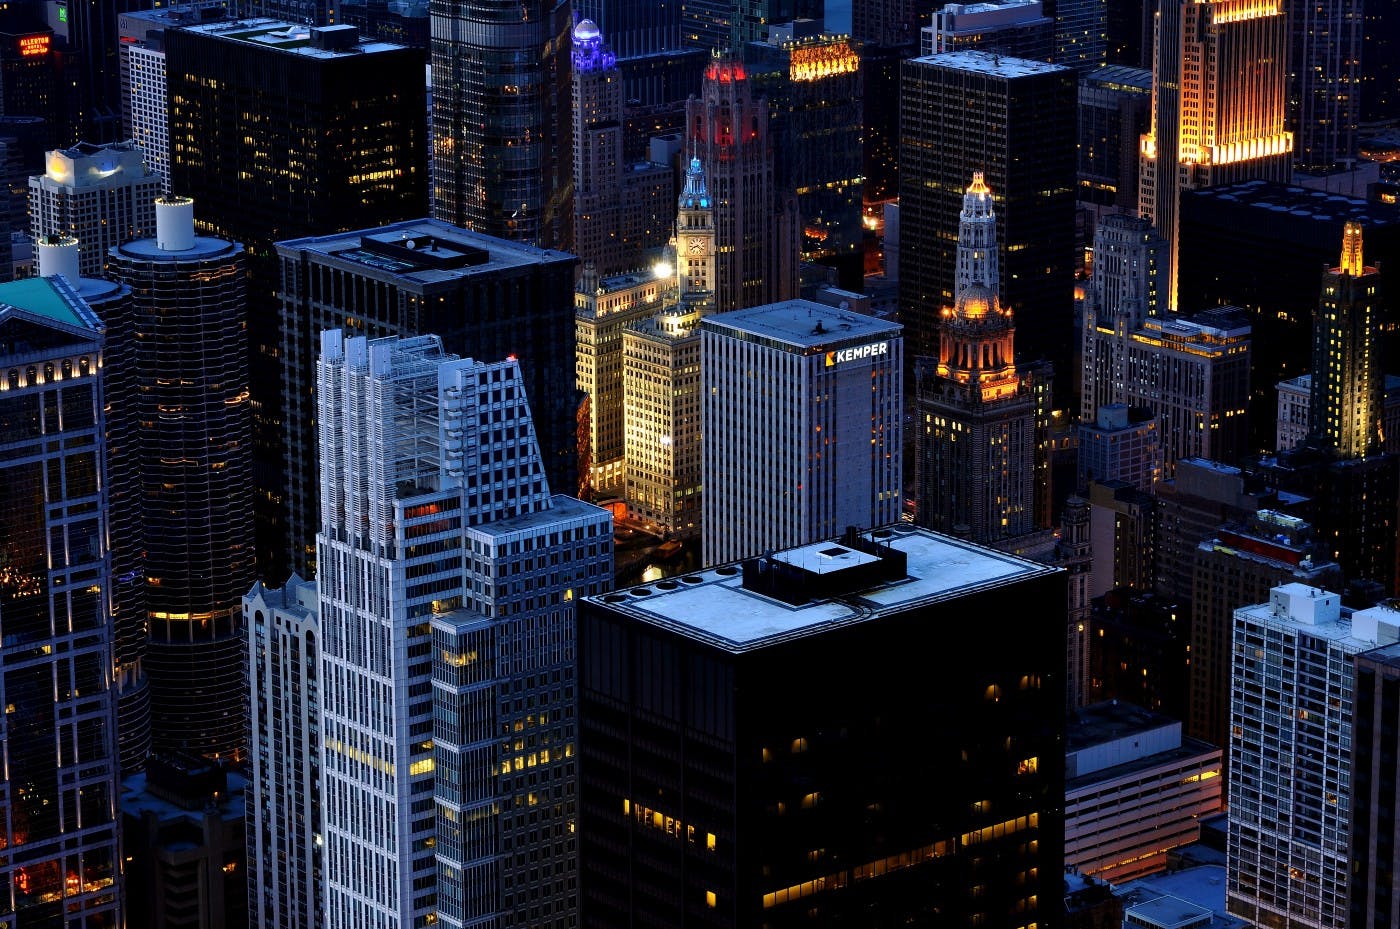 An aerial view of a city with skyscrapers at dusk. Photo by Alex Shutin on Unsplash.